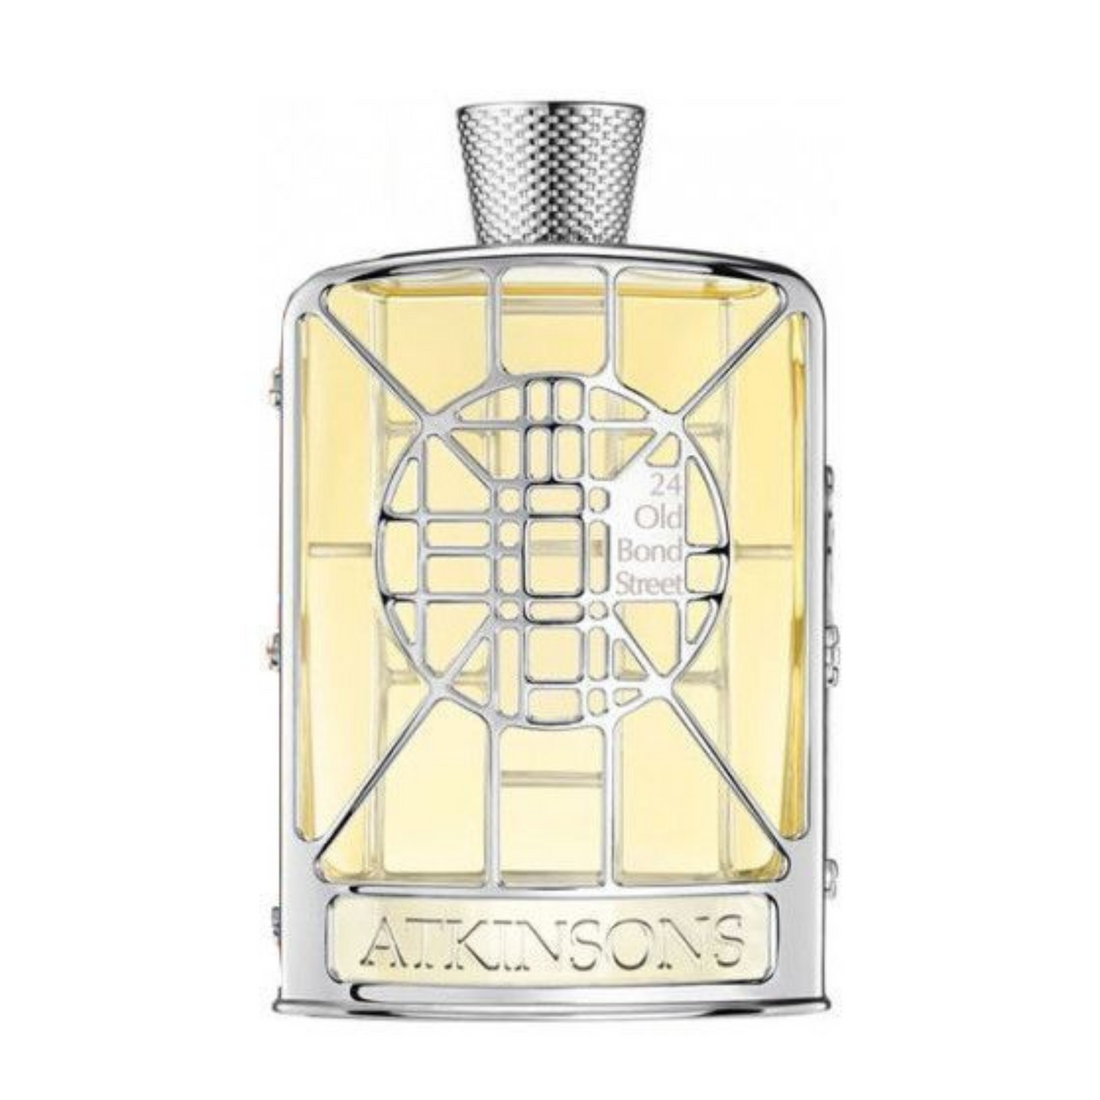 ATKINSONS 24 OLD BOND STREET COLOGNE Limited Edition